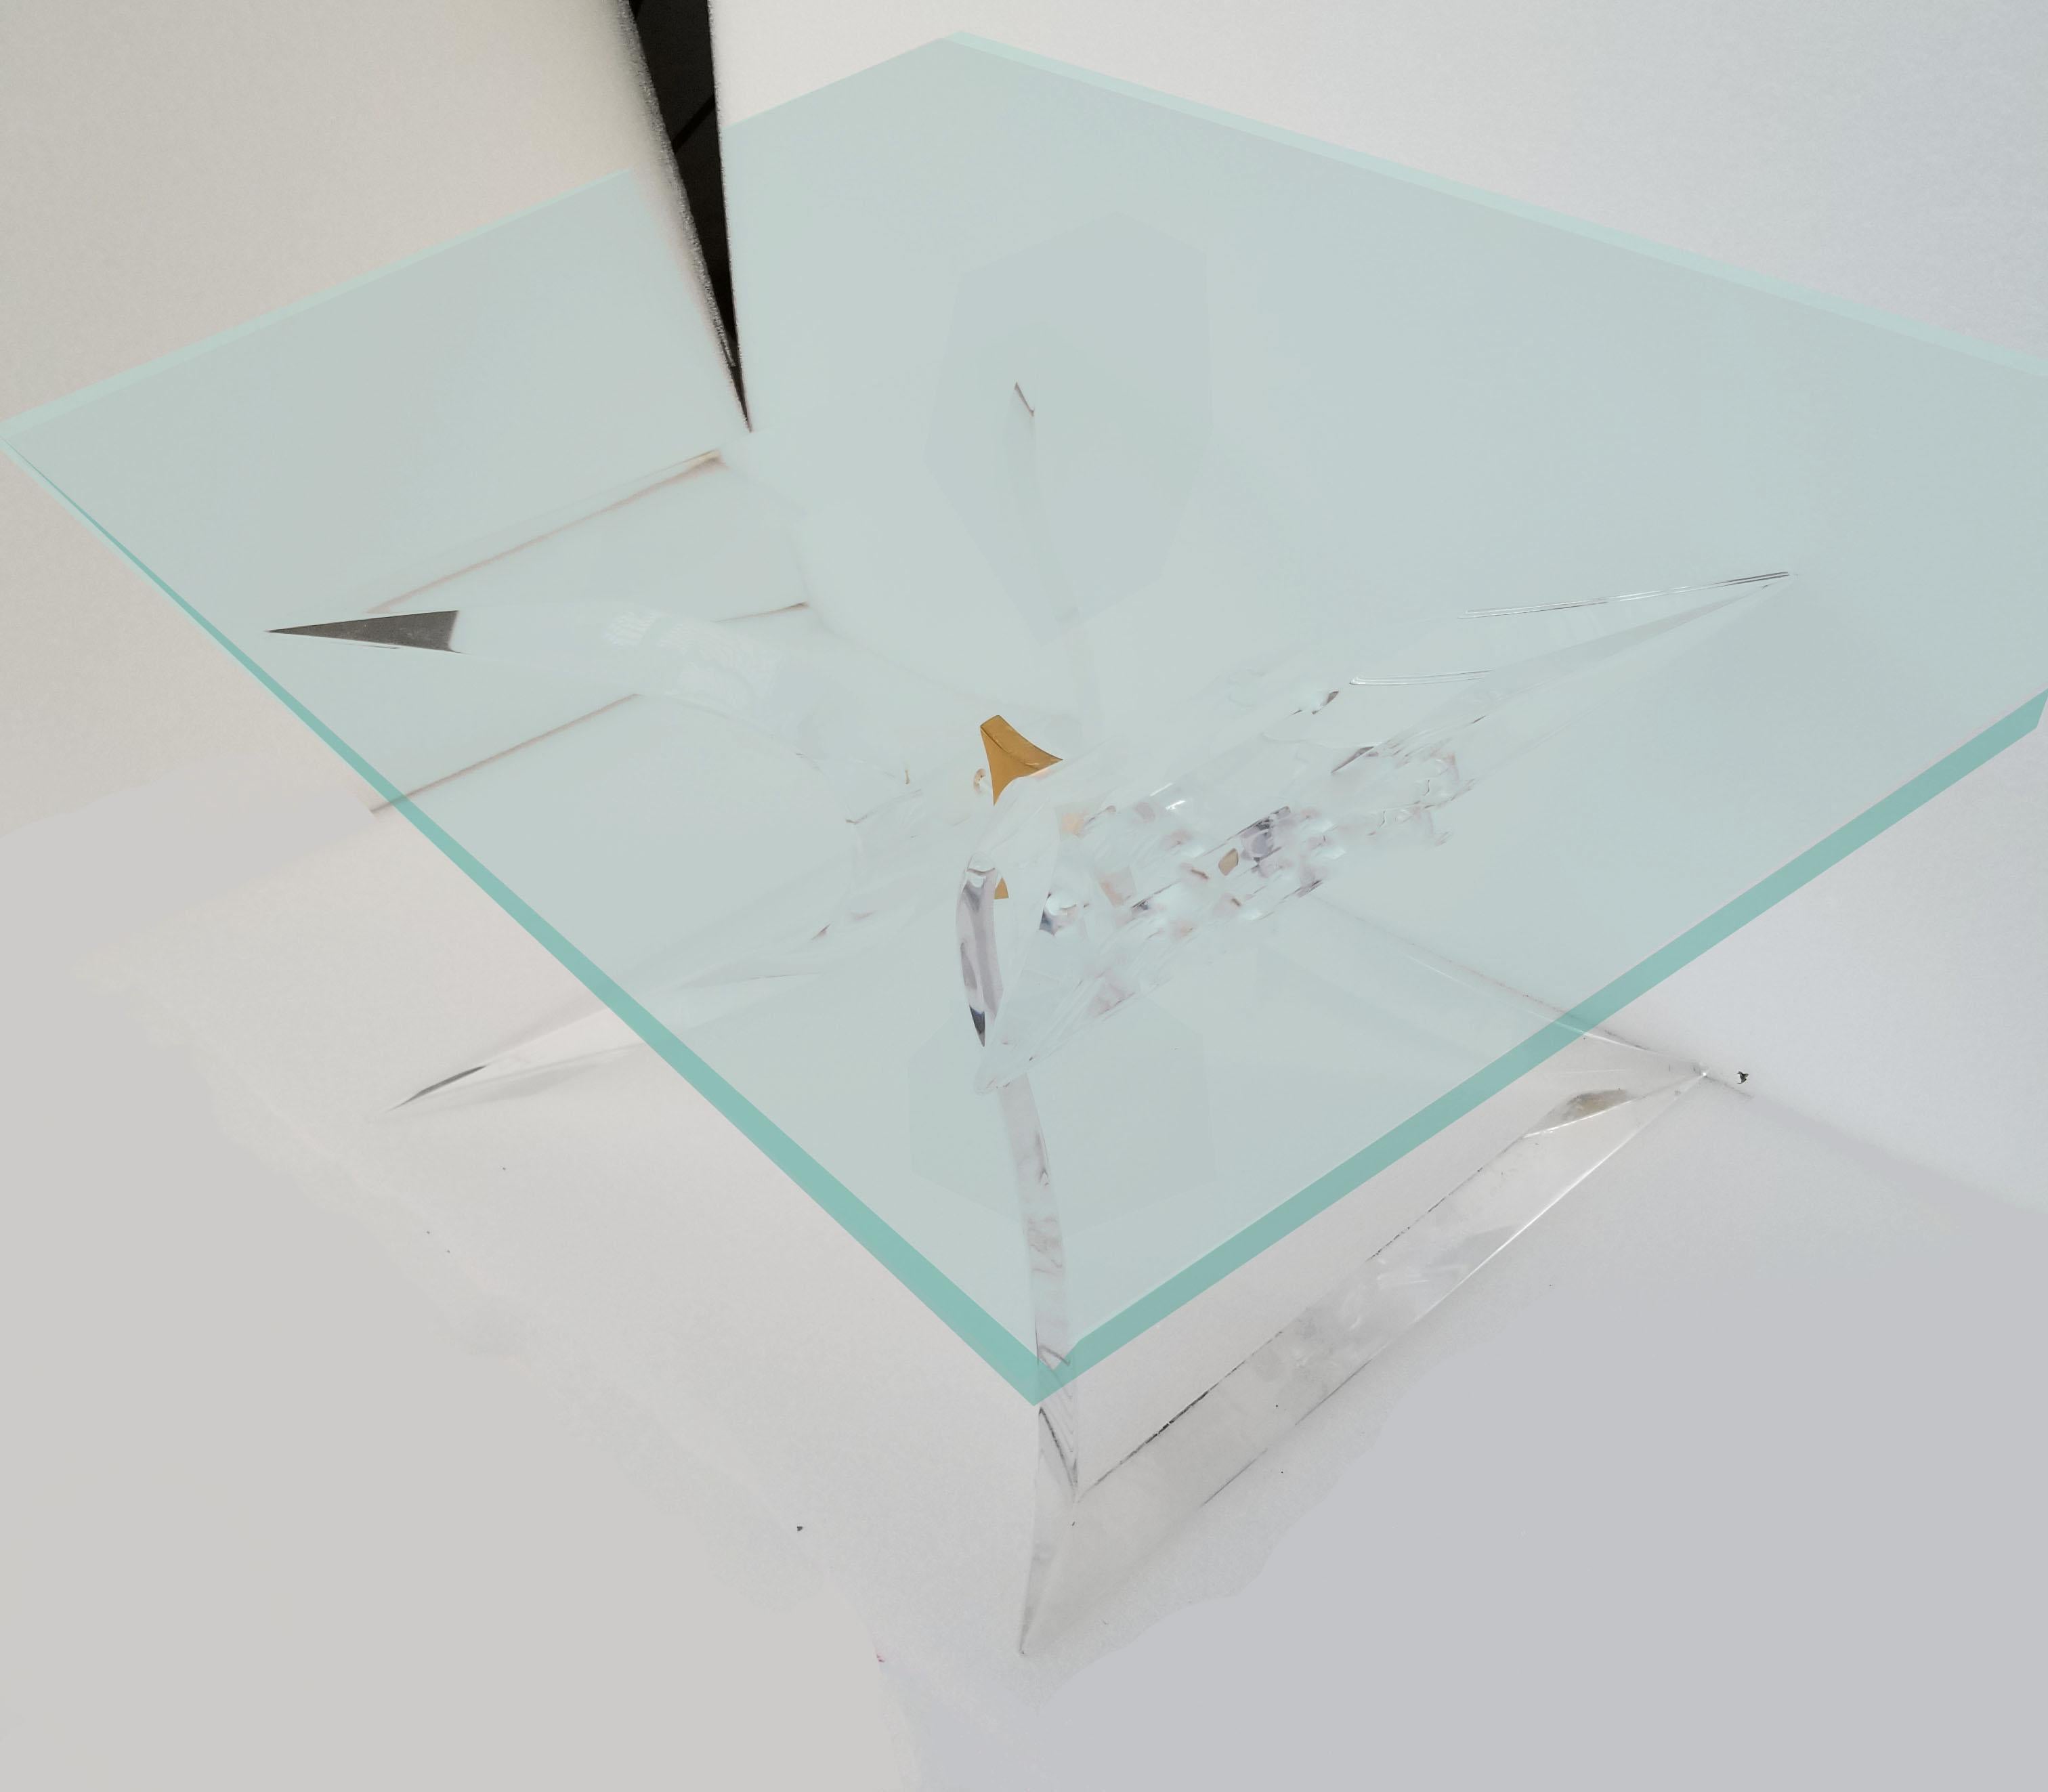 Superb Mid-Century Modern Lucite butterfly side table signed Lion in Frost at the base.
Pair available, perfect for a pair of side or sofa tables.